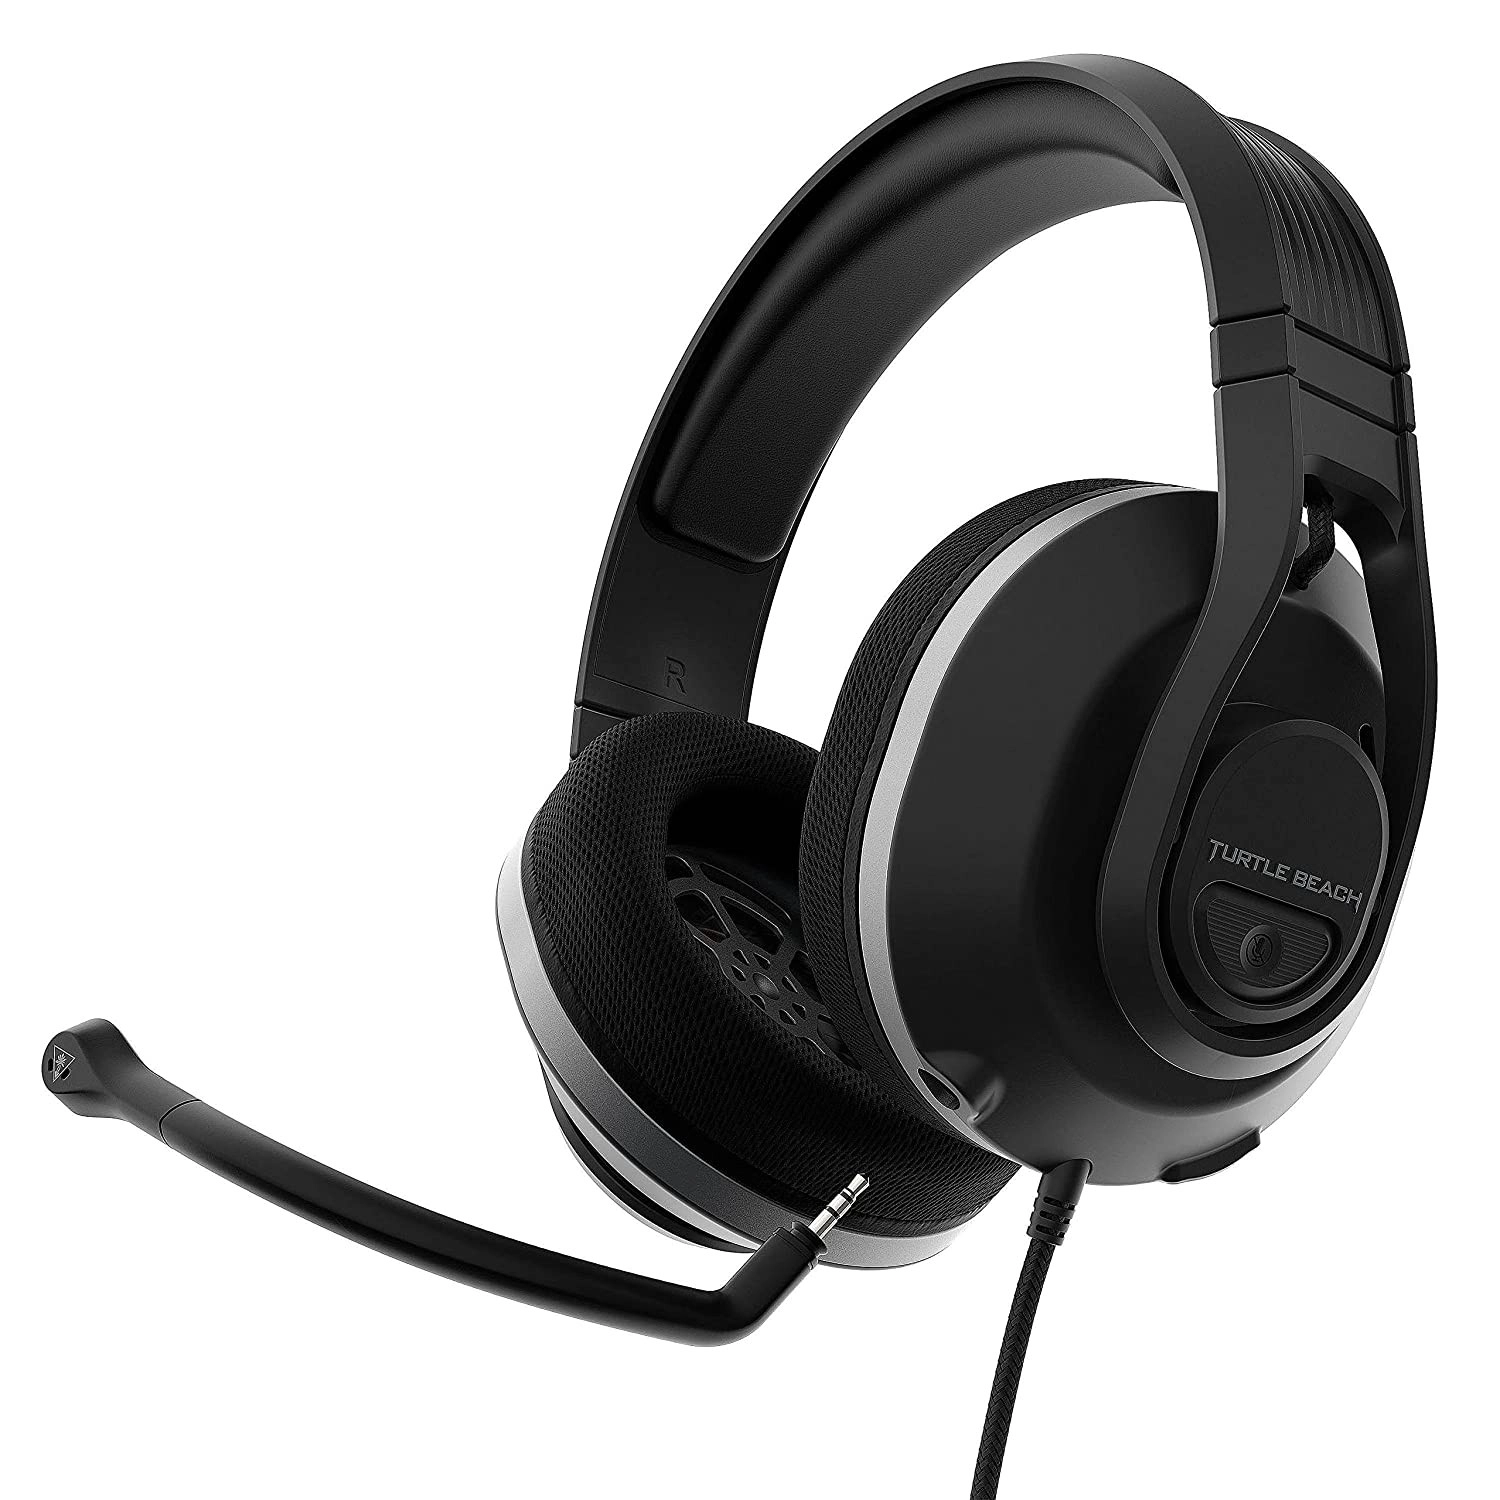 Turtle Beach Recon 500 Gaming Headset - Fekete (TBS-6400-02)